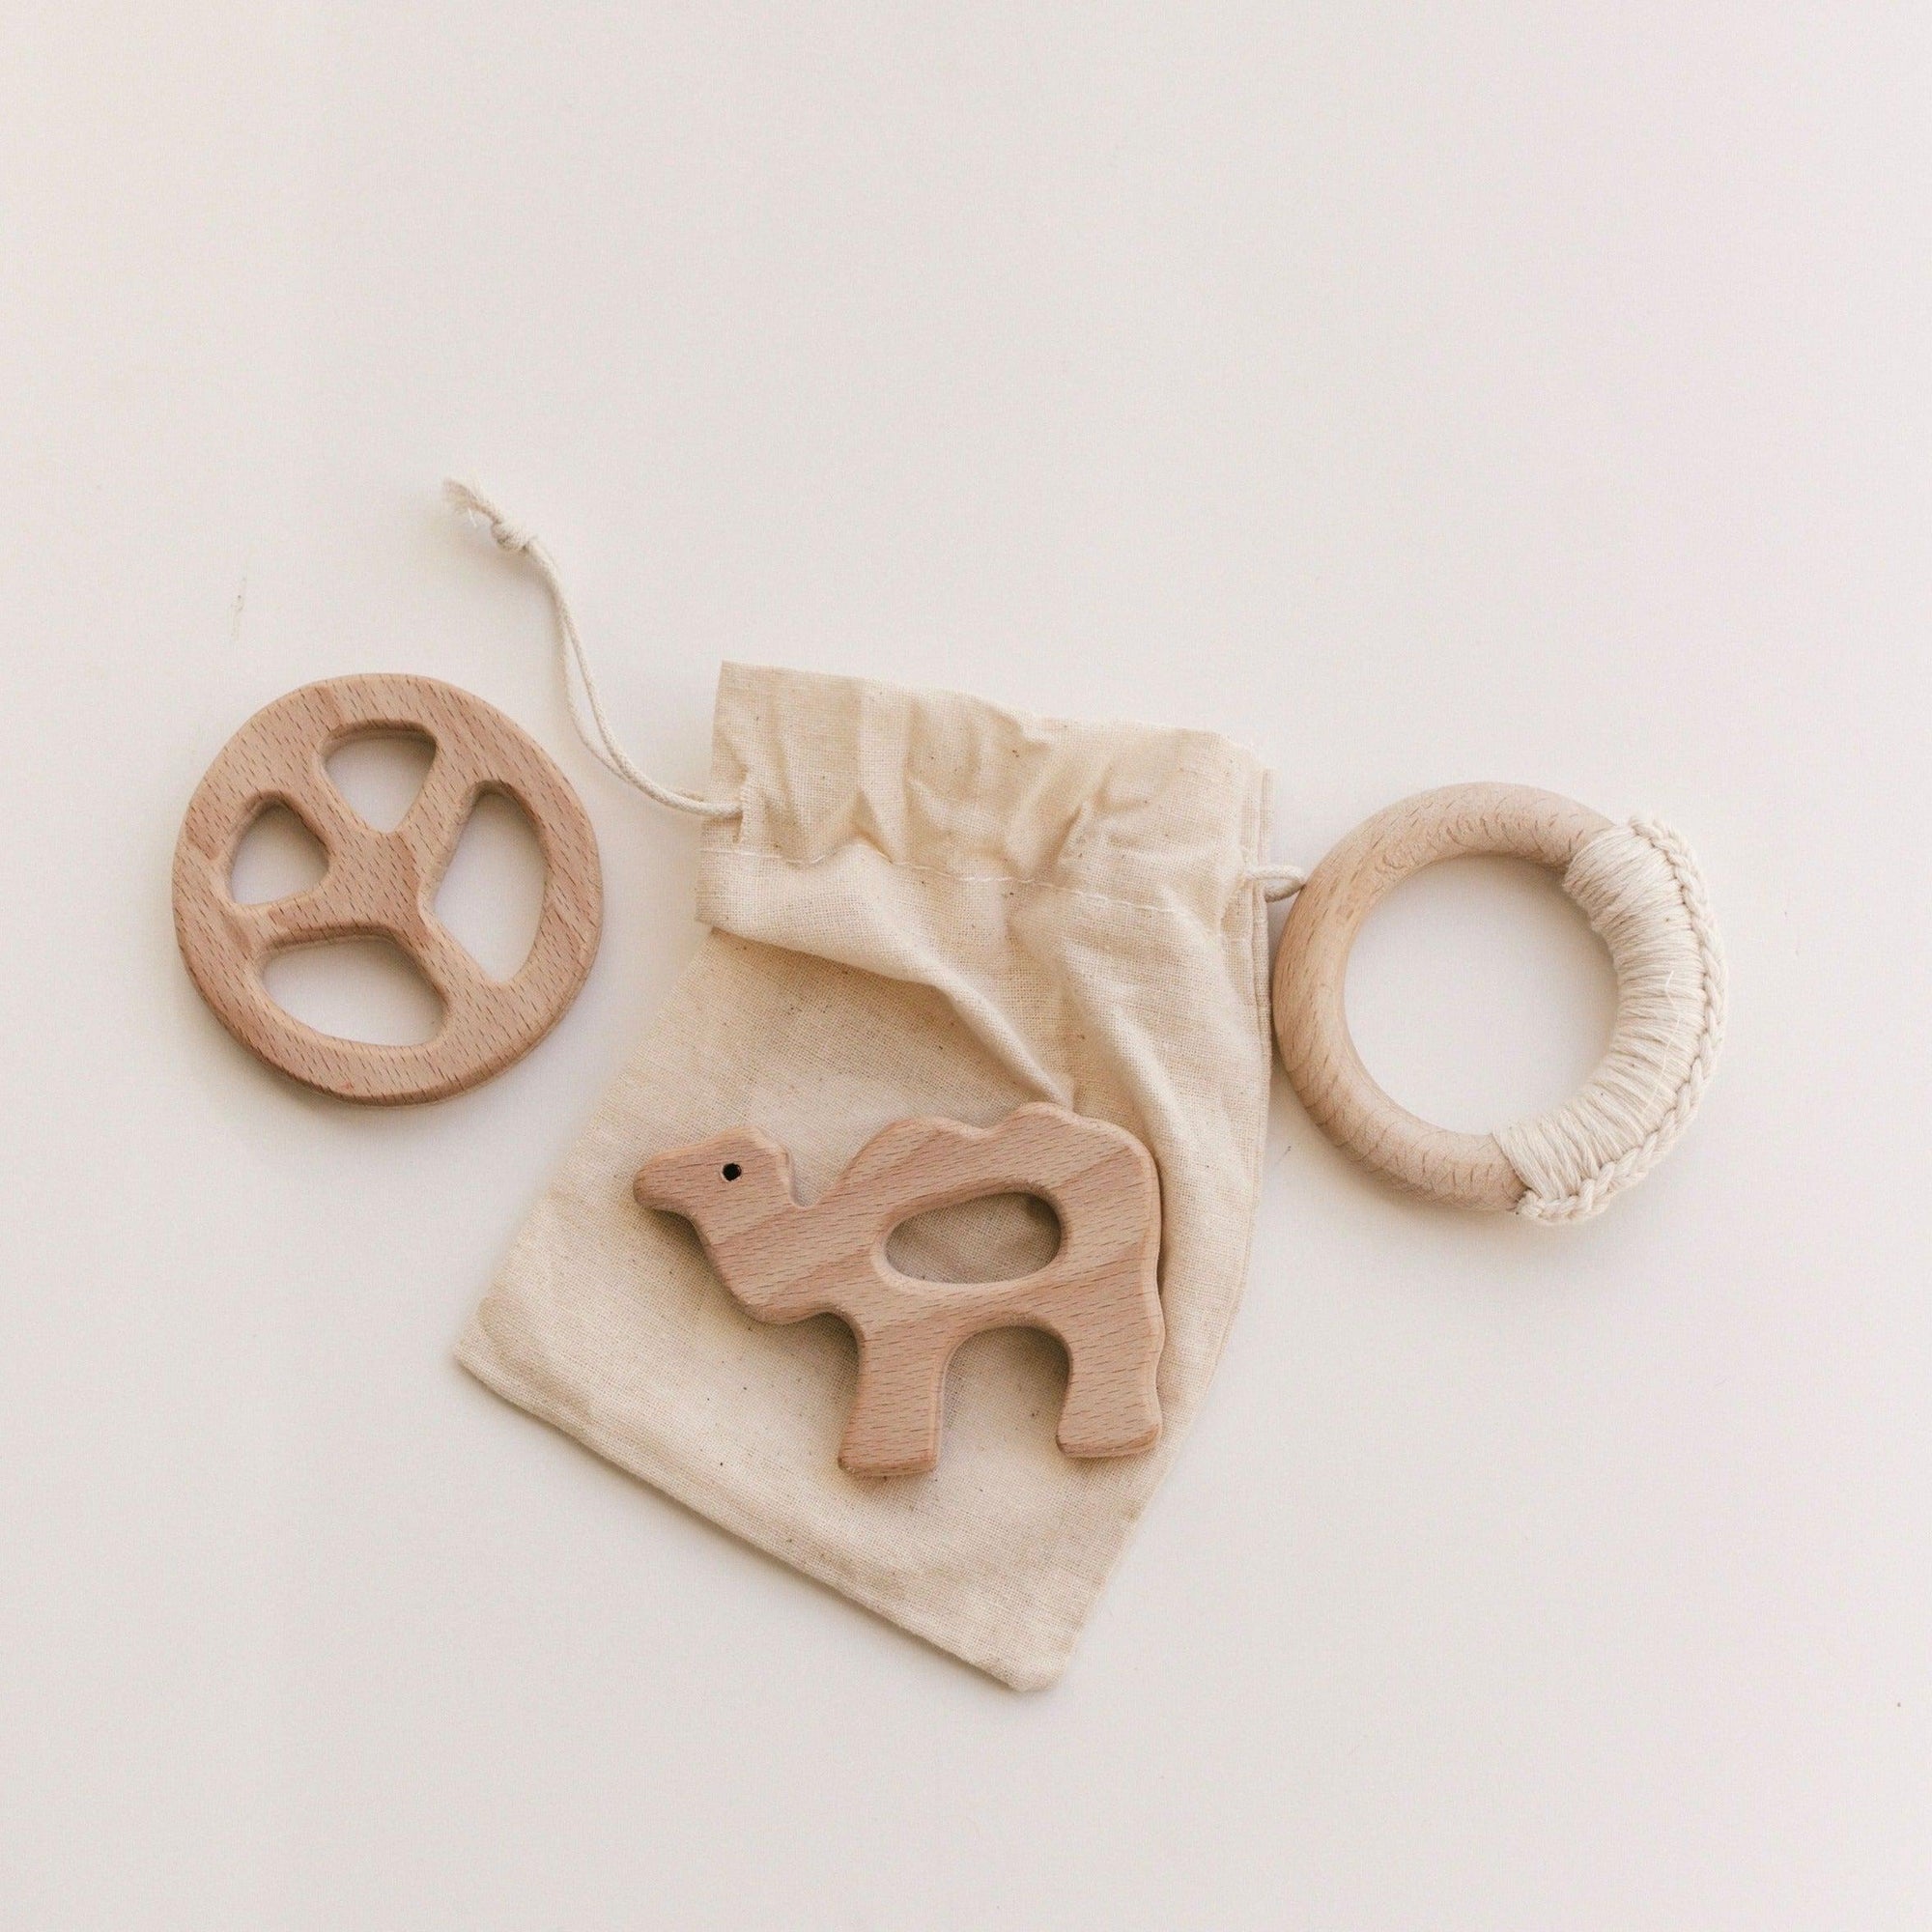 Our Natural Beech Wood Peace Teethers are 100% certified non-toxic and hand sanded to a smooth finish. Each teether is left unpolished, uncoated and untreated great for skin sensitivities and possible allergies.